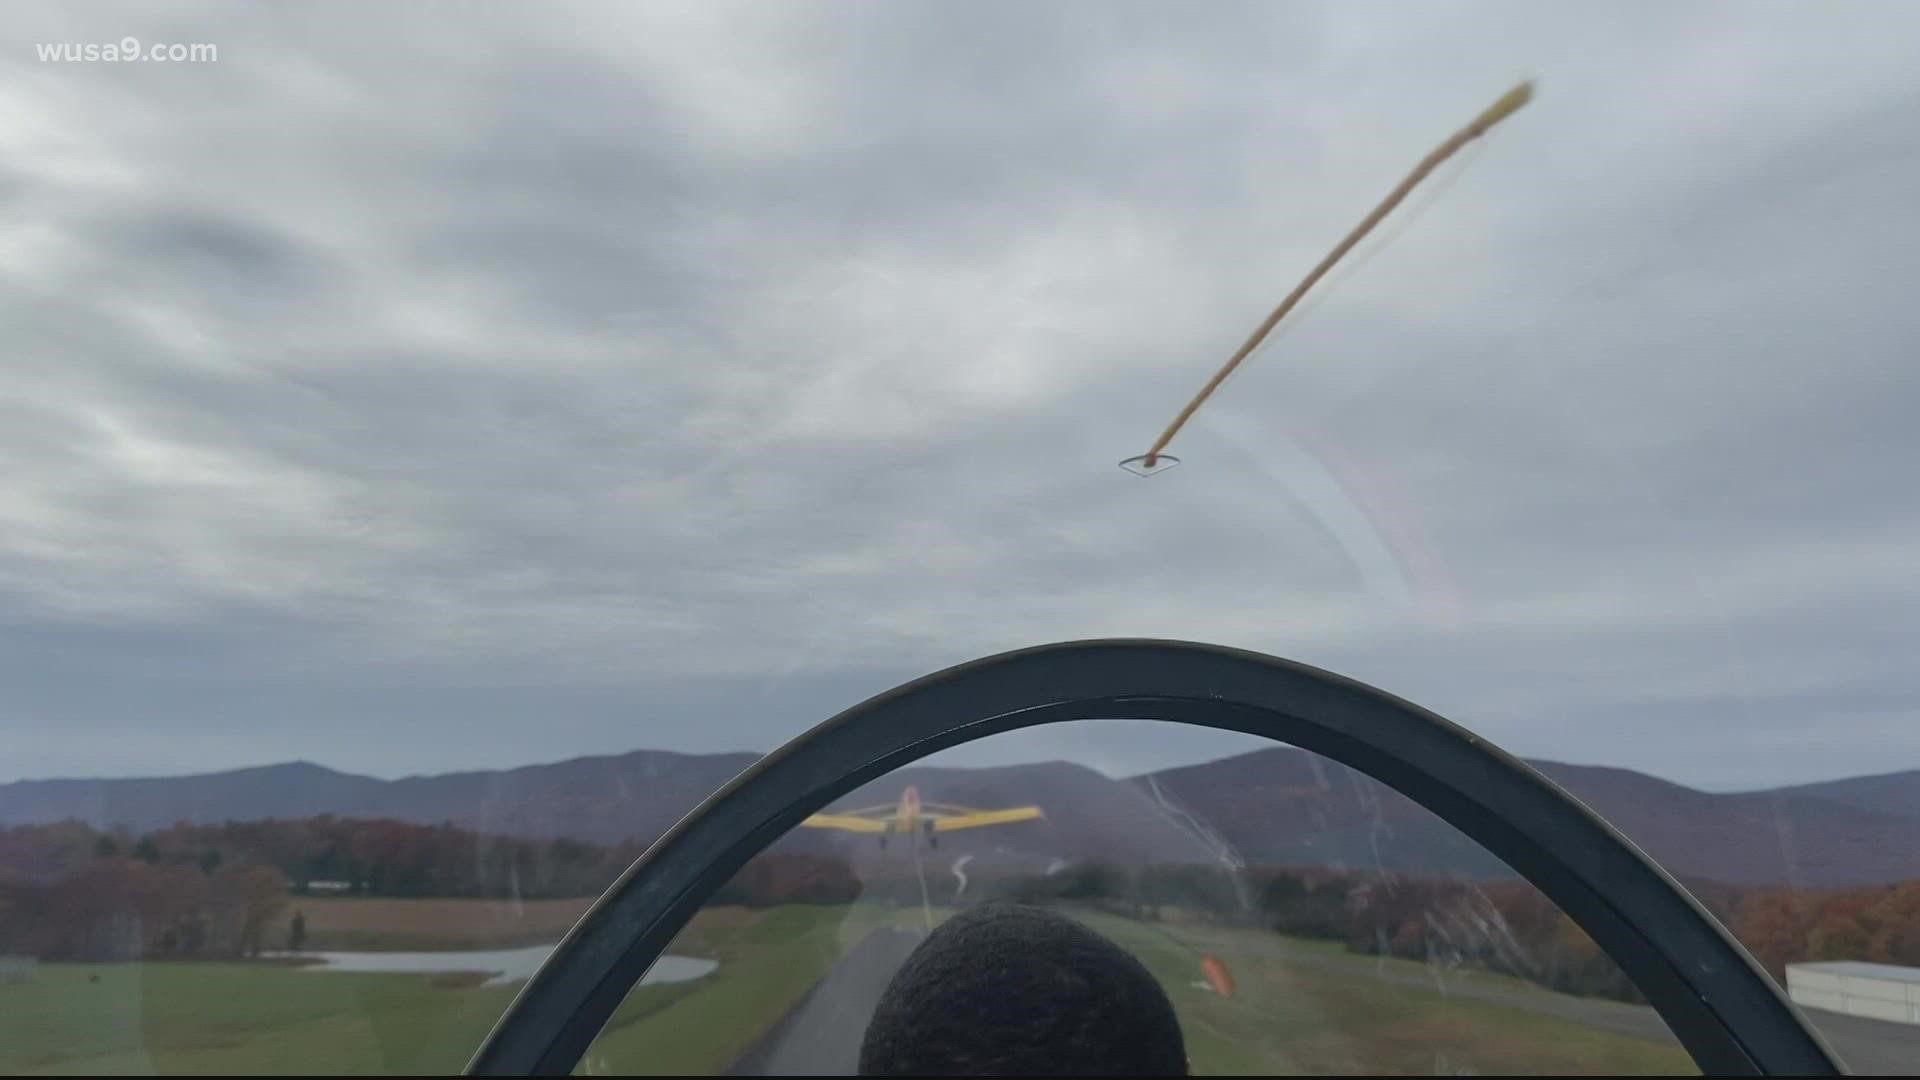 Caleb Smith has already got his glider pilot's license and he's only 16.